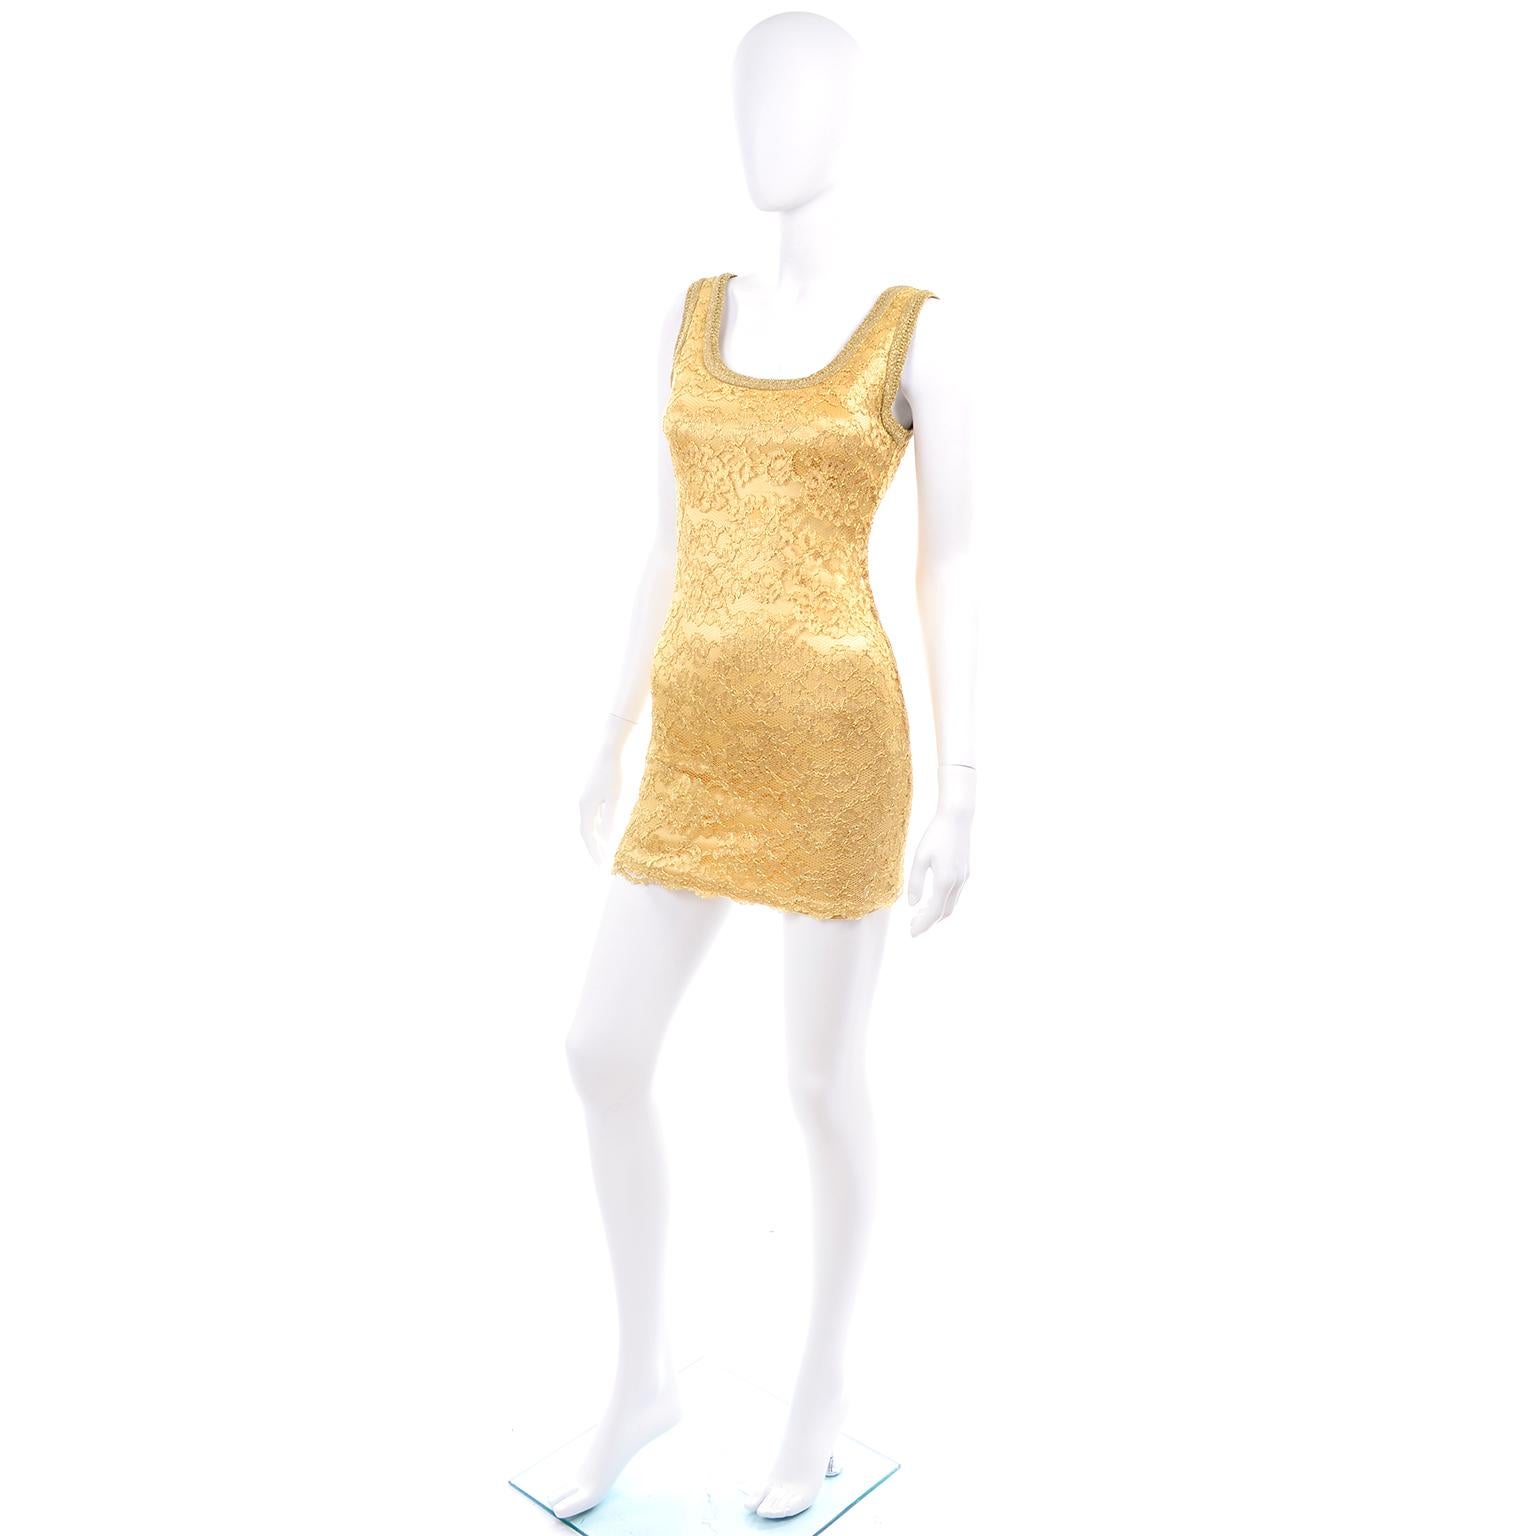 This is a stunning vintage metallic gold stretch lace mini dress from Bergdorf Goodman with the Gruppo GFT label.  You can wear this as a mini or style it with a pair of leggings! This designer dress was made in the USA and it is in excellent